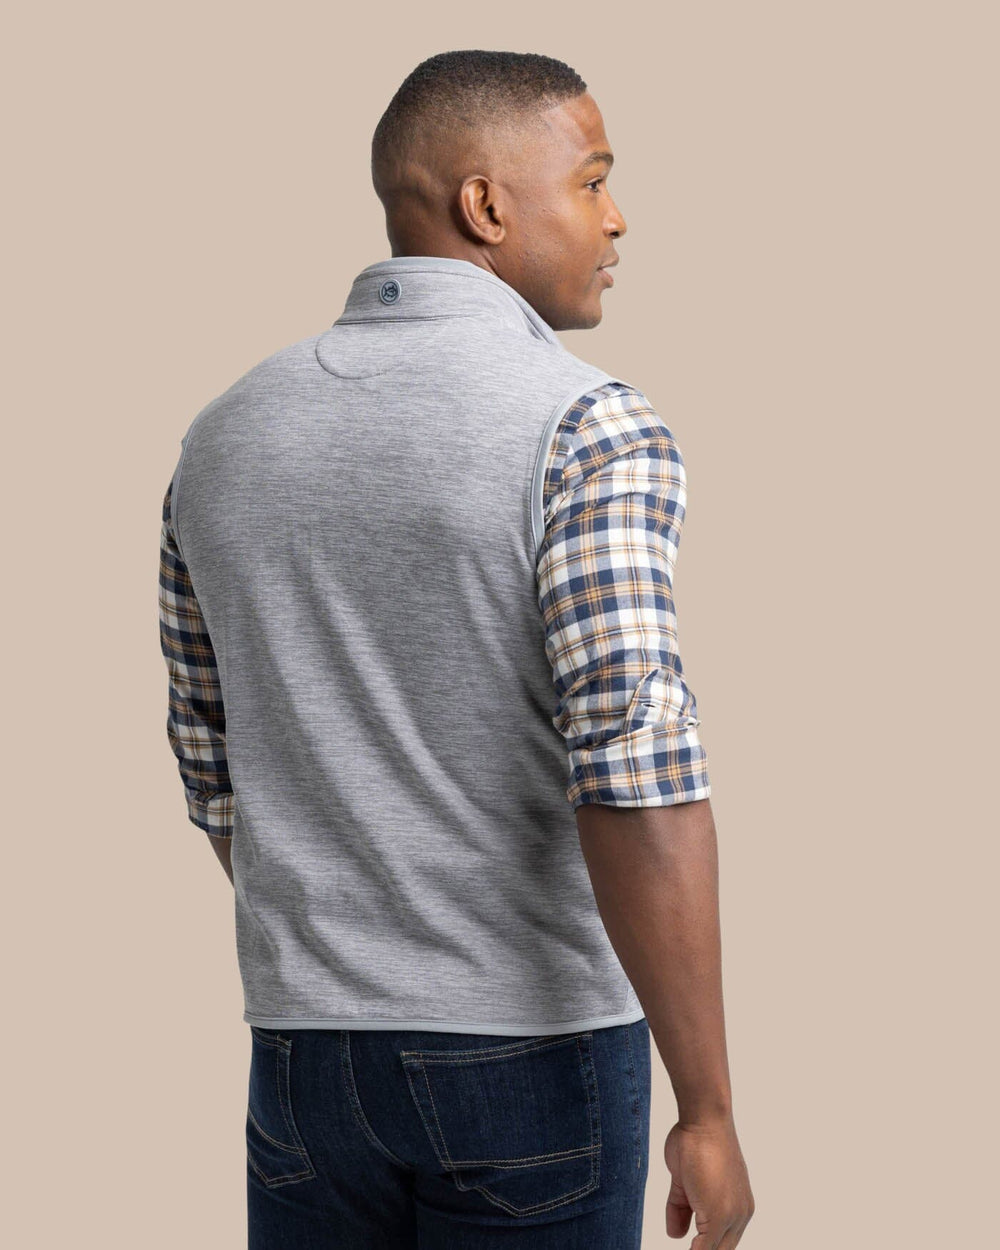 The back view of the Southern Tide Baybrook Heather Vest by Southern Tide - Heather Ultimate Grey